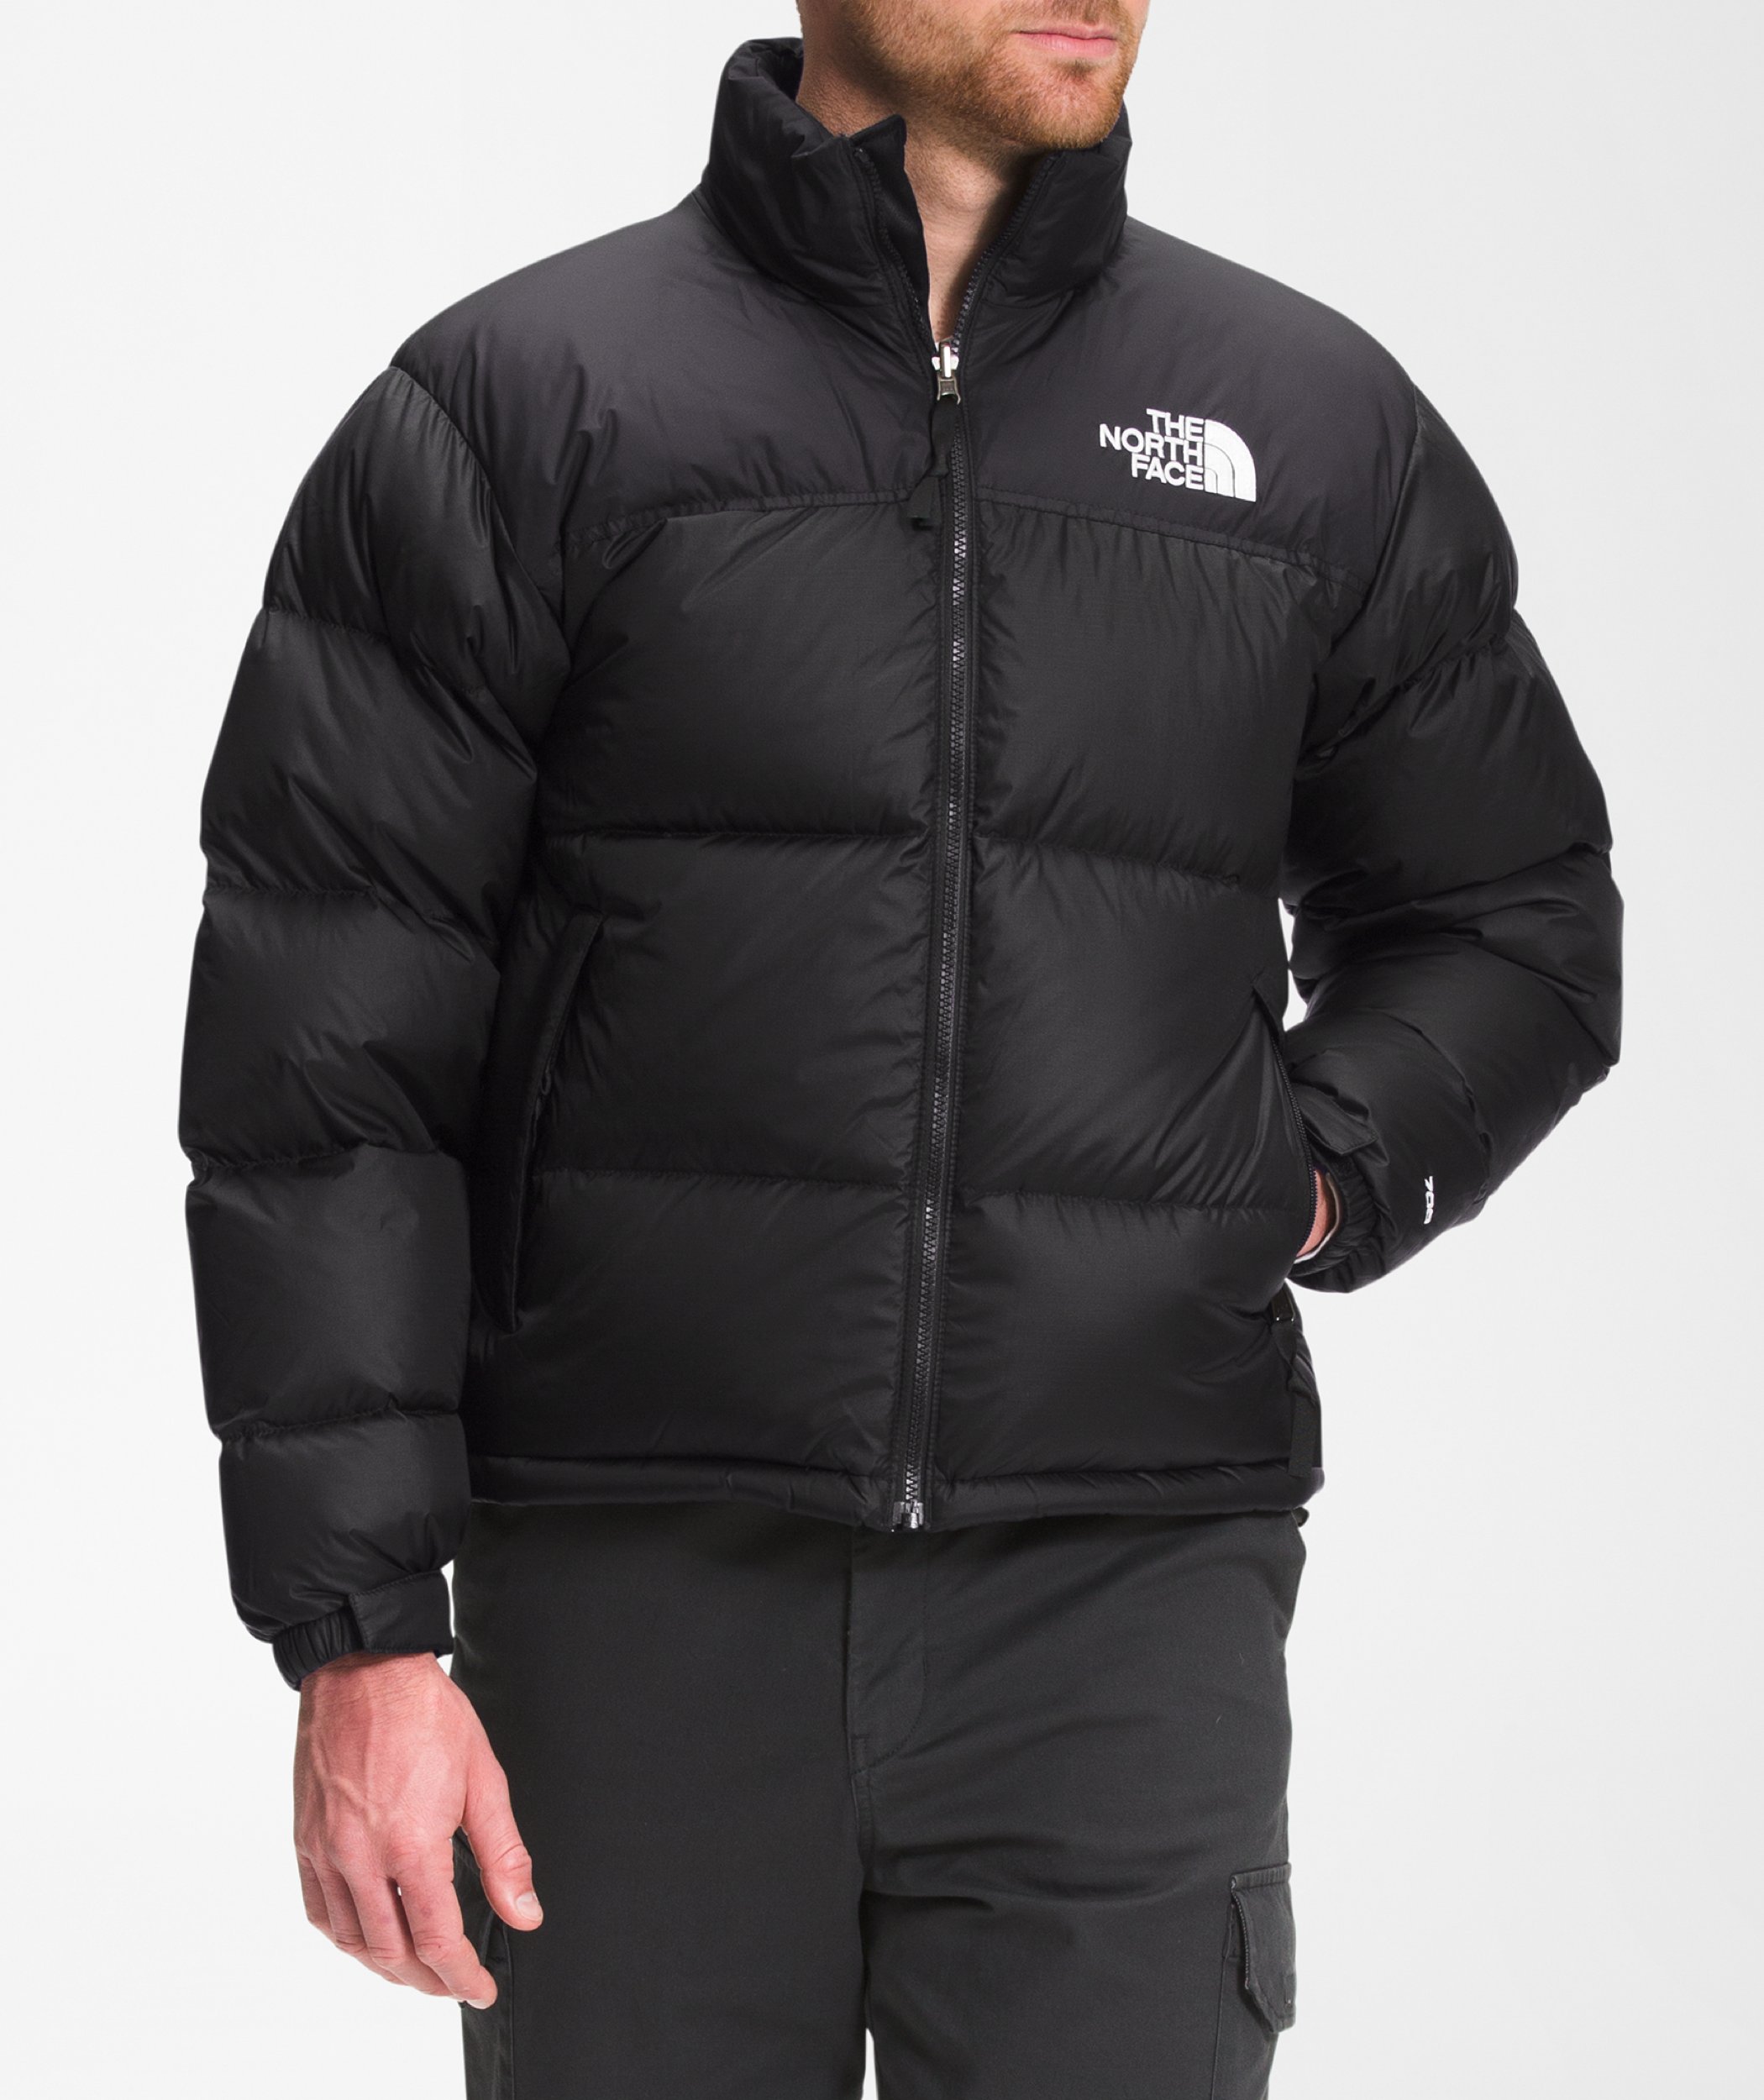 Passerby Piping Show you Men's 1996 Retro Nuptse Jacket | The North Face